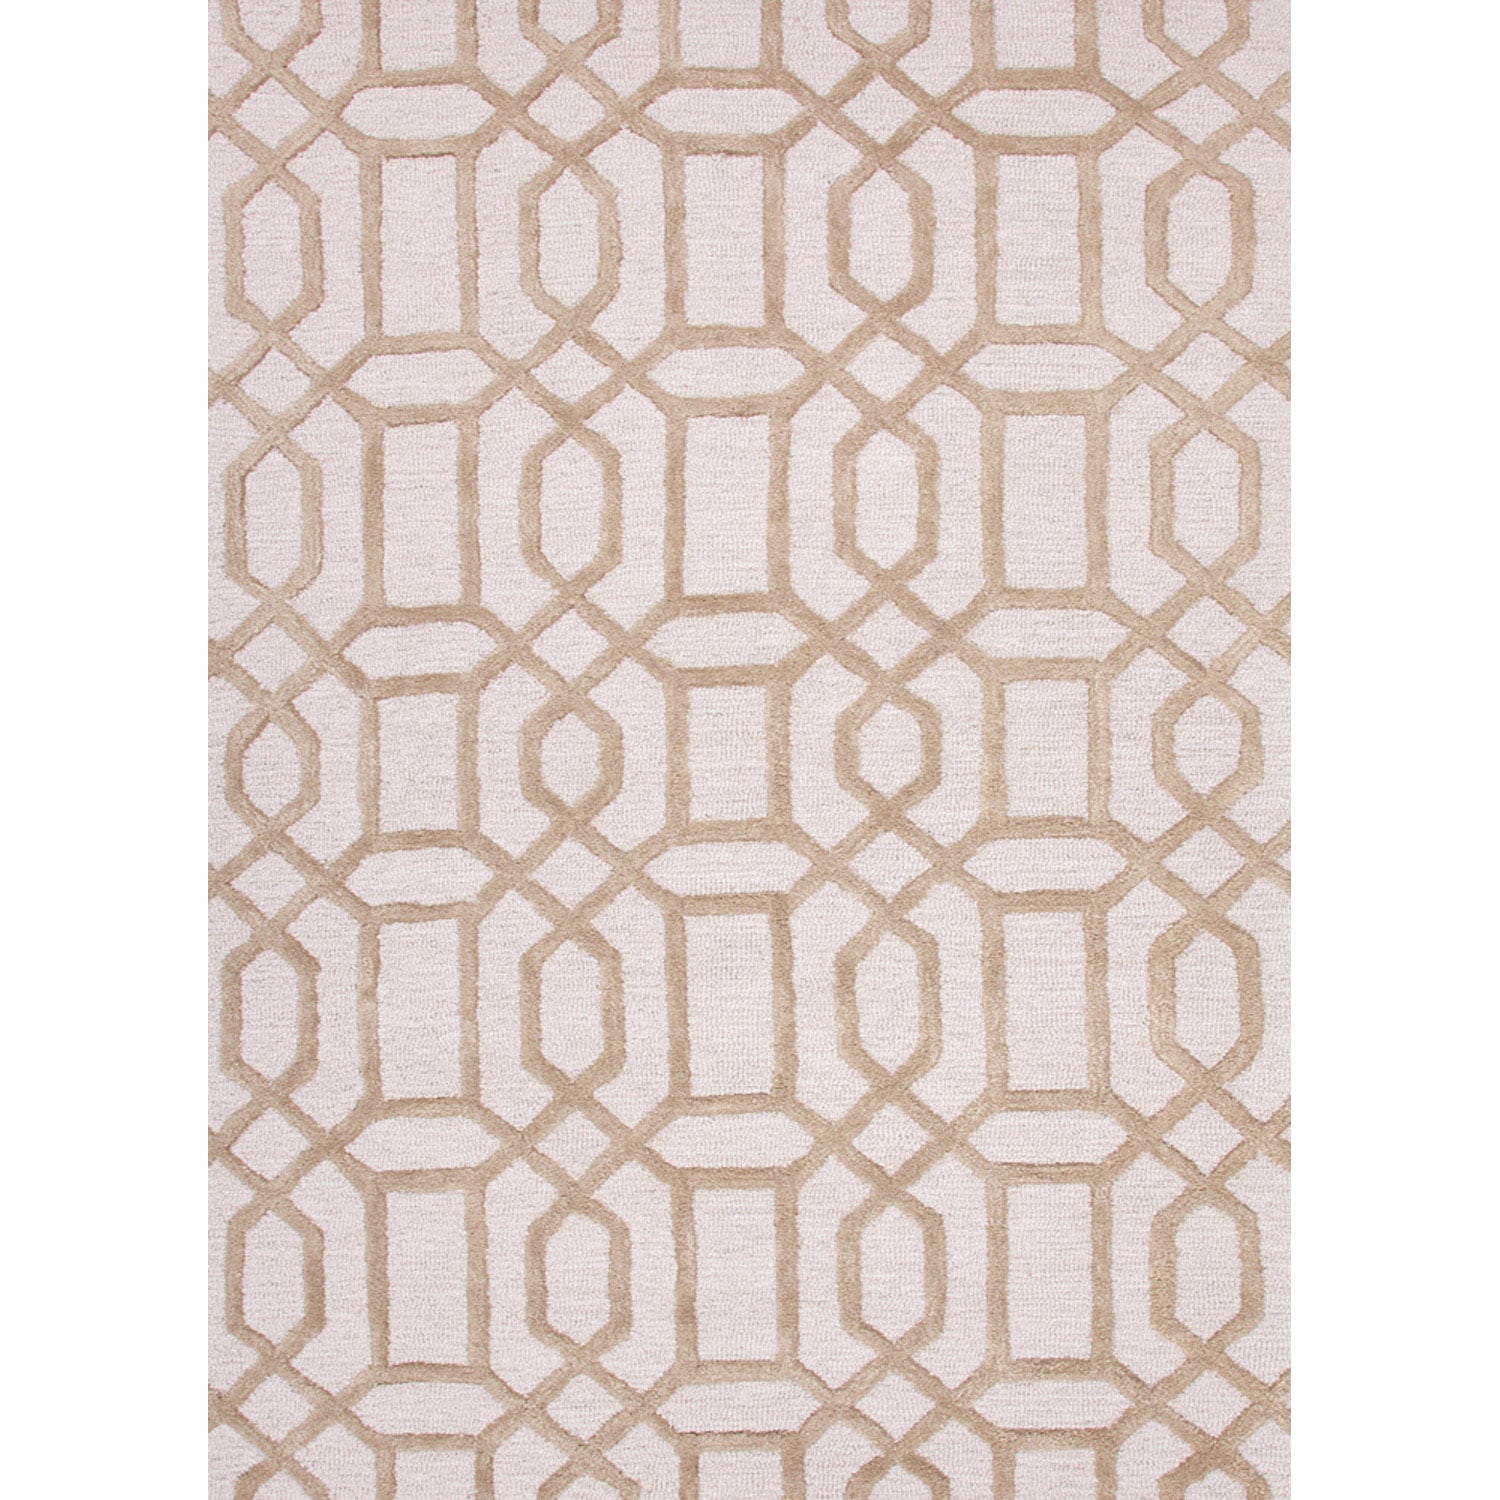 Hand tufted Contemporary Geometric Pattern Brown/ Ivory Non skid Rug (36 X 56)